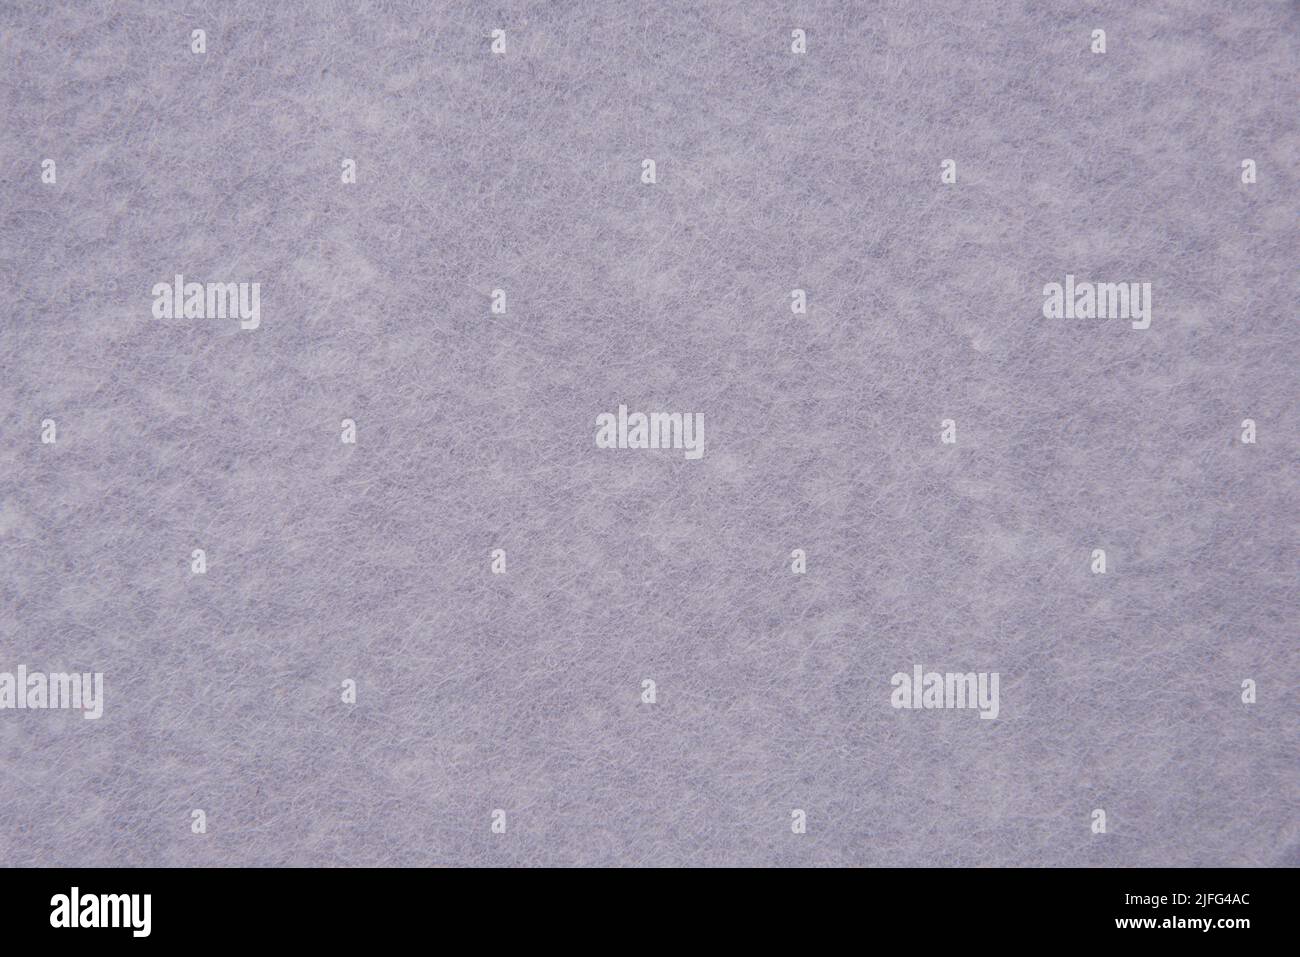 Gray fabric felt soft material textured background Stock Photo